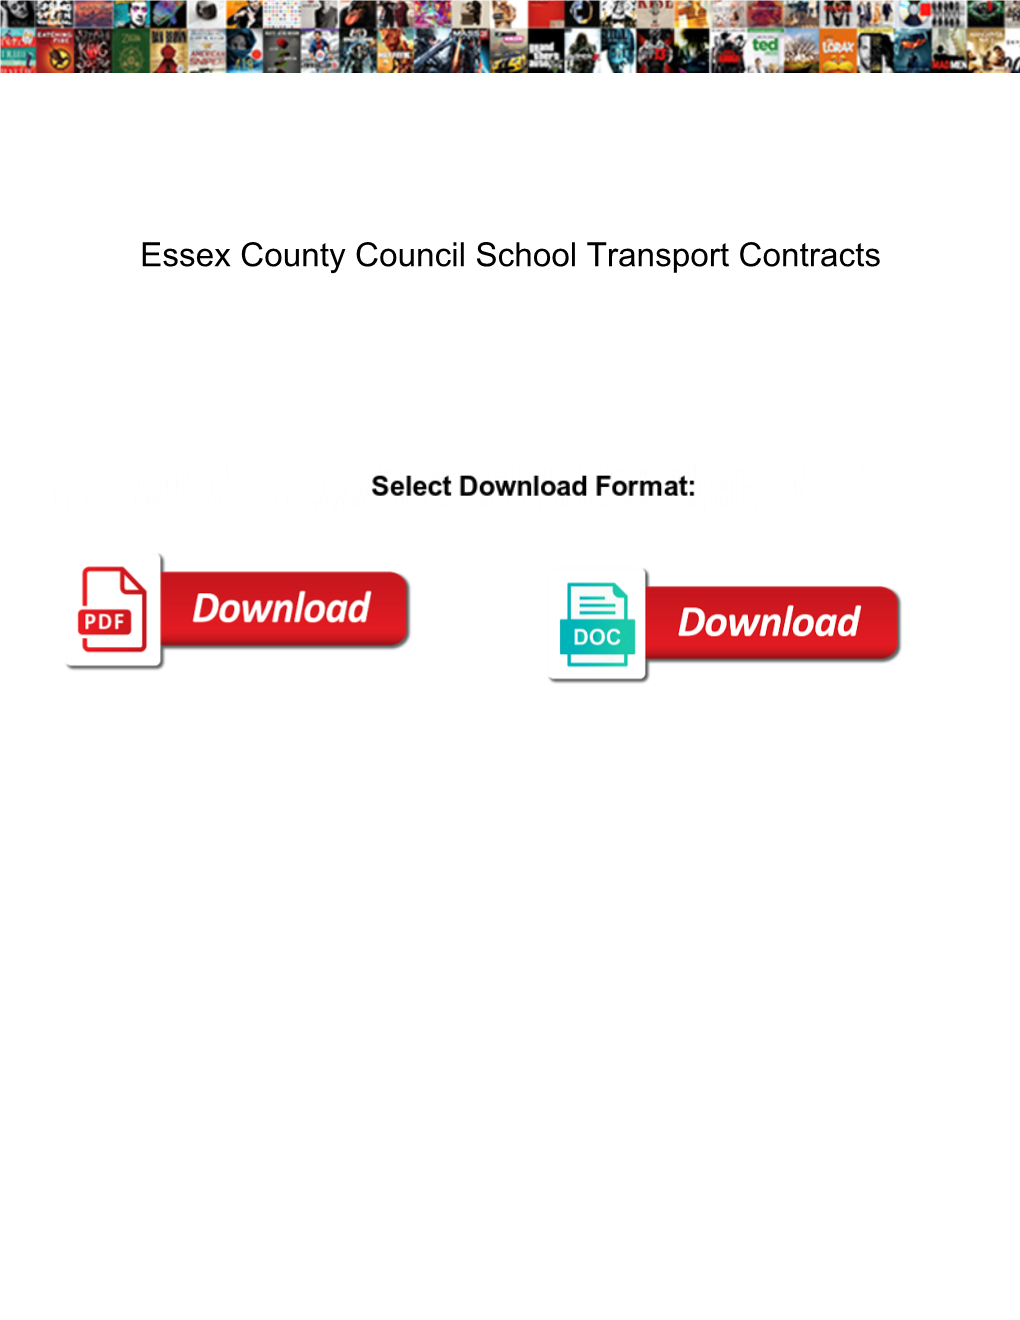 Essex County Council School Transport Contracts